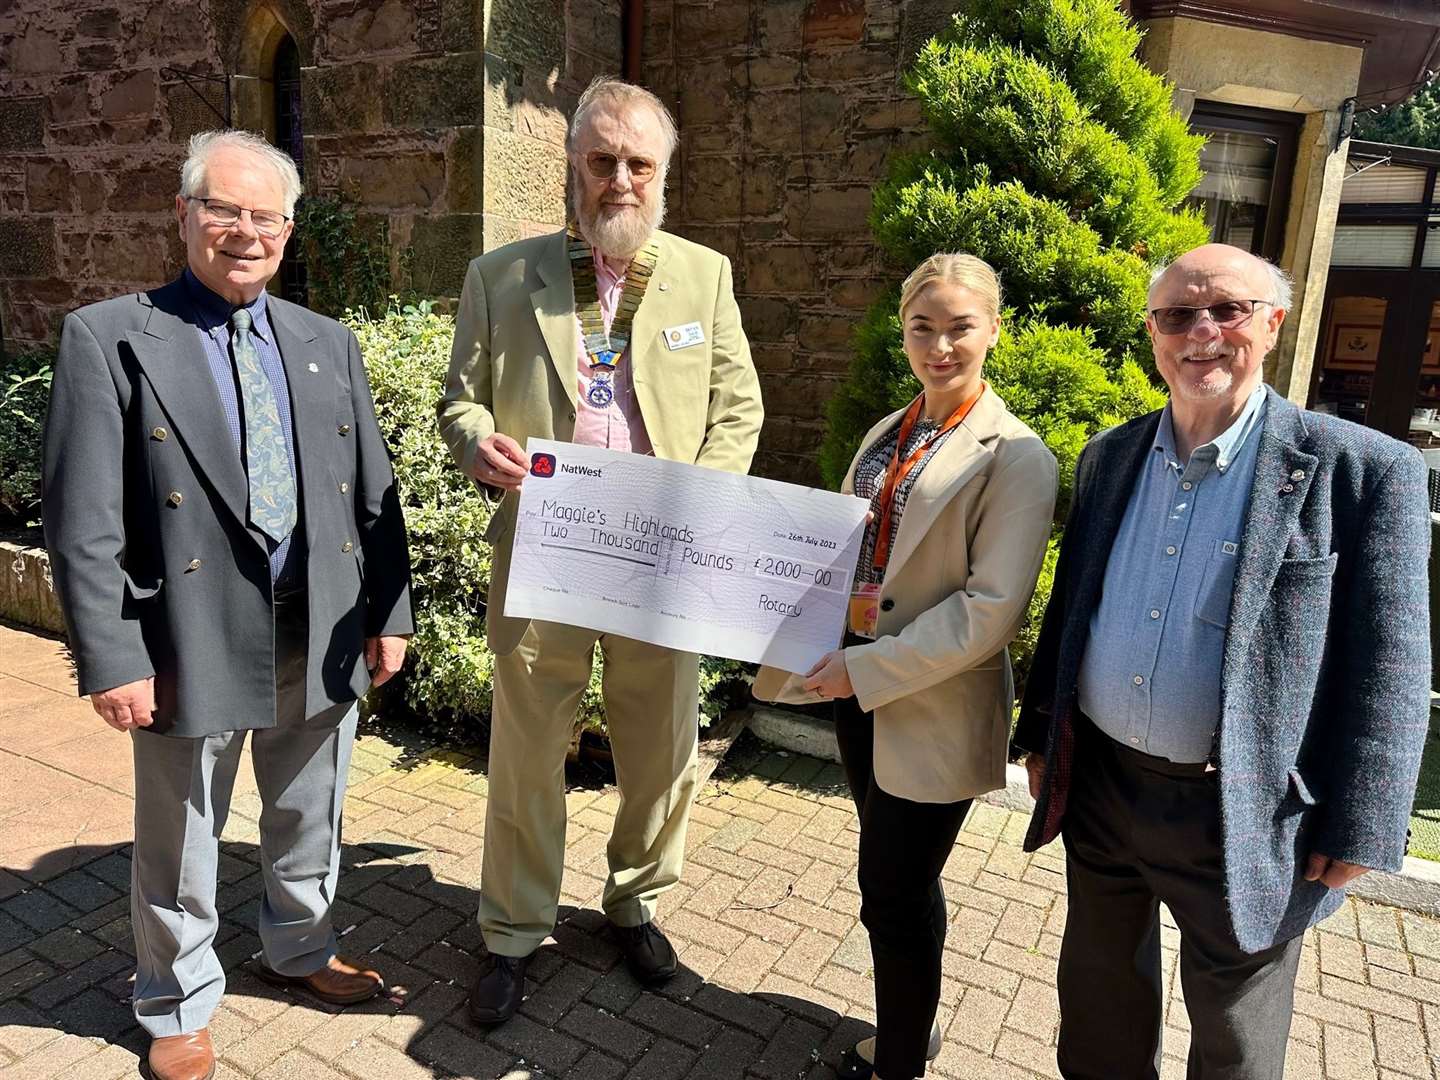 Mia Pimm, of Maggie's Highland, receives a cheque from Inverness Loch Ness Rotary Club president Bryan Smith. Also present were tour organisers Nicol Manson and Ormond Smith.